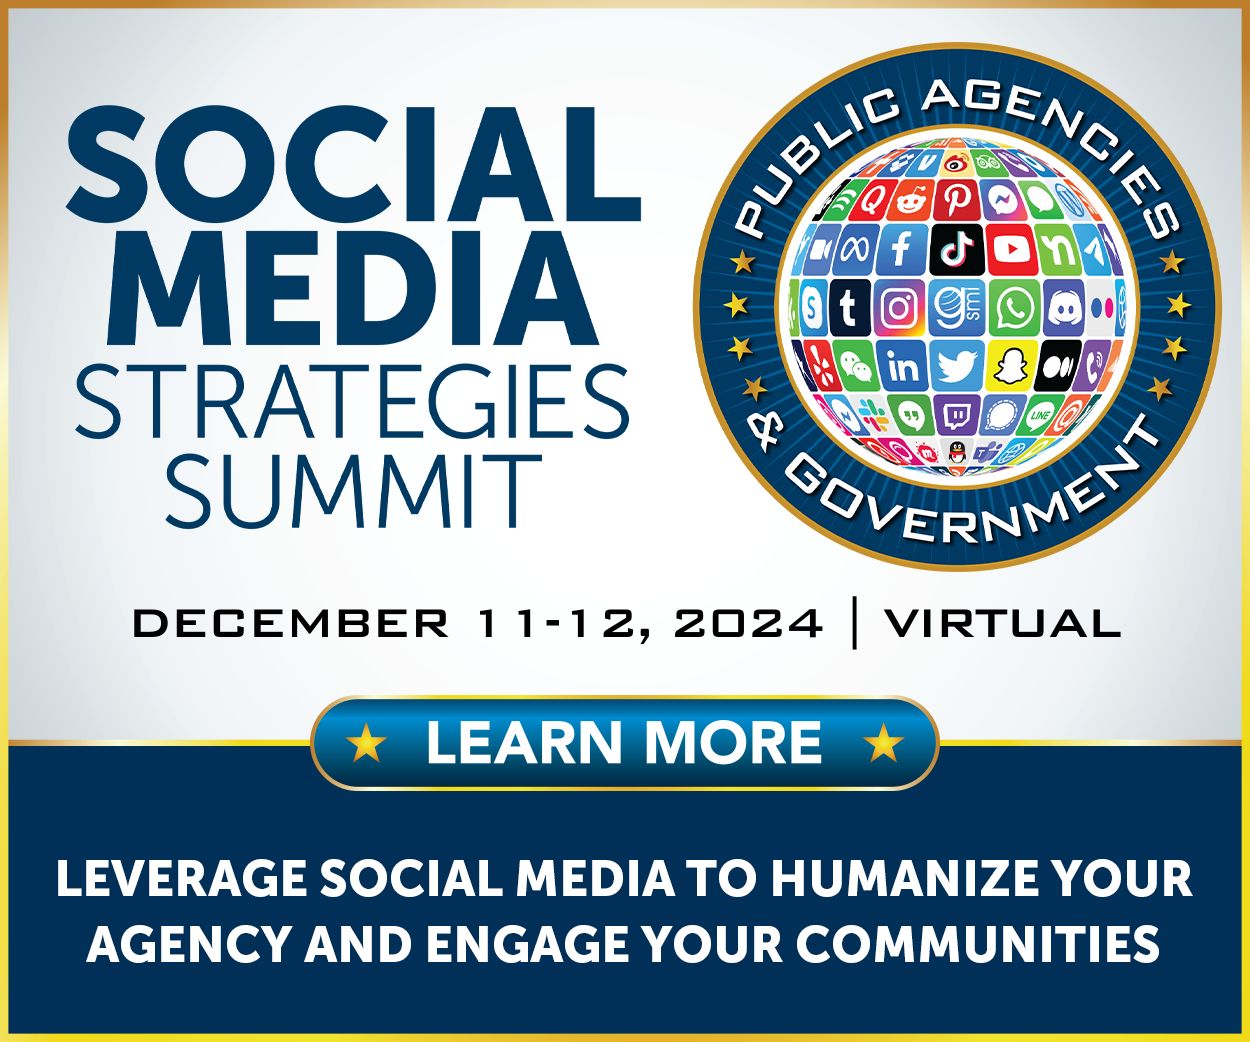 Social Media Strategies Summit Public Agencies and Government, Online Event